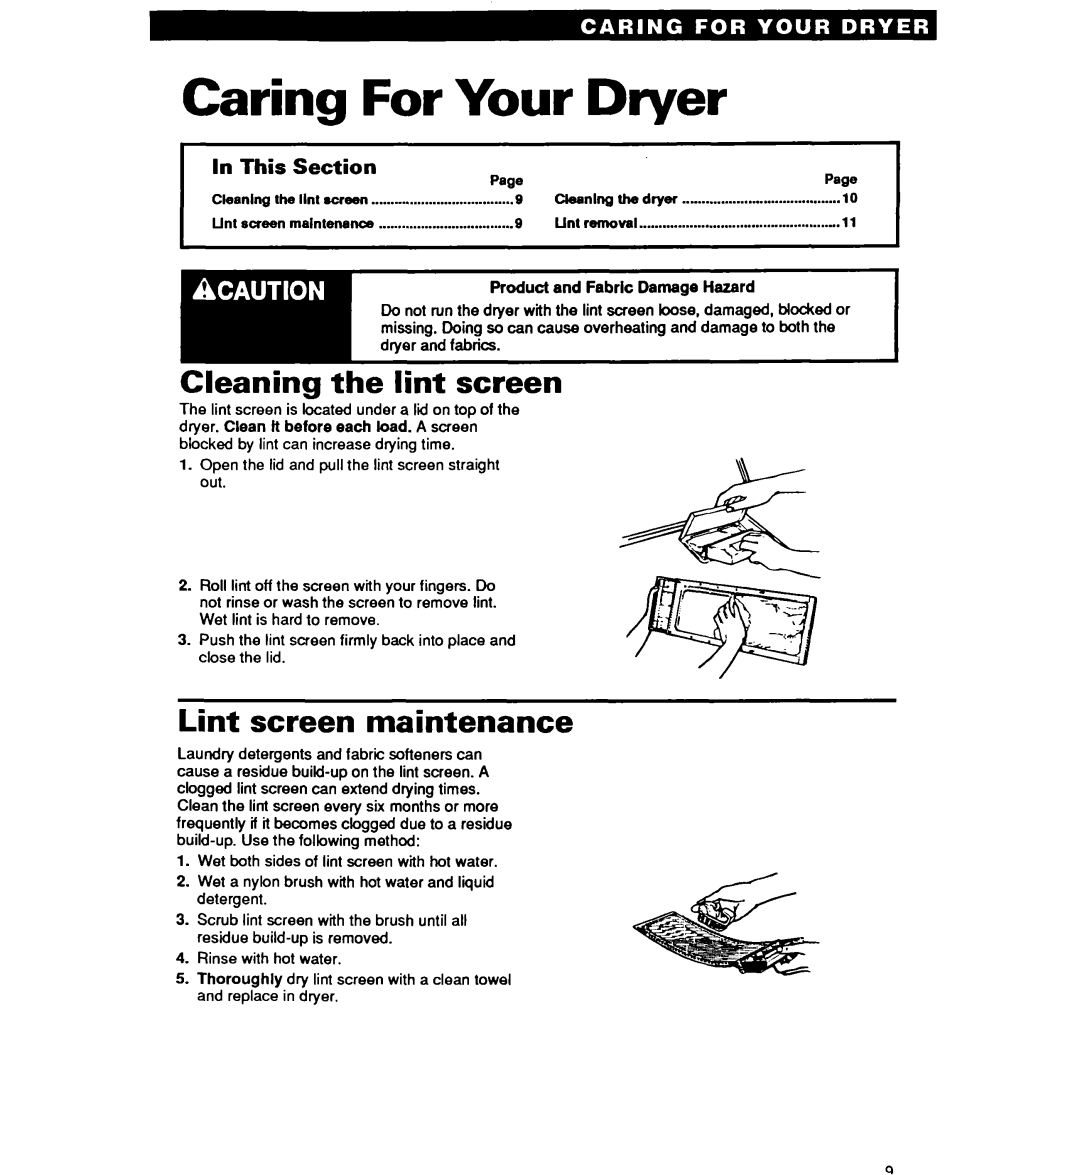 Whirlpool Gl2020W, GL3030W, EL2020W Caring For Your Dryer, Cleaning the lint screen, Lint screen maintenance, Section 